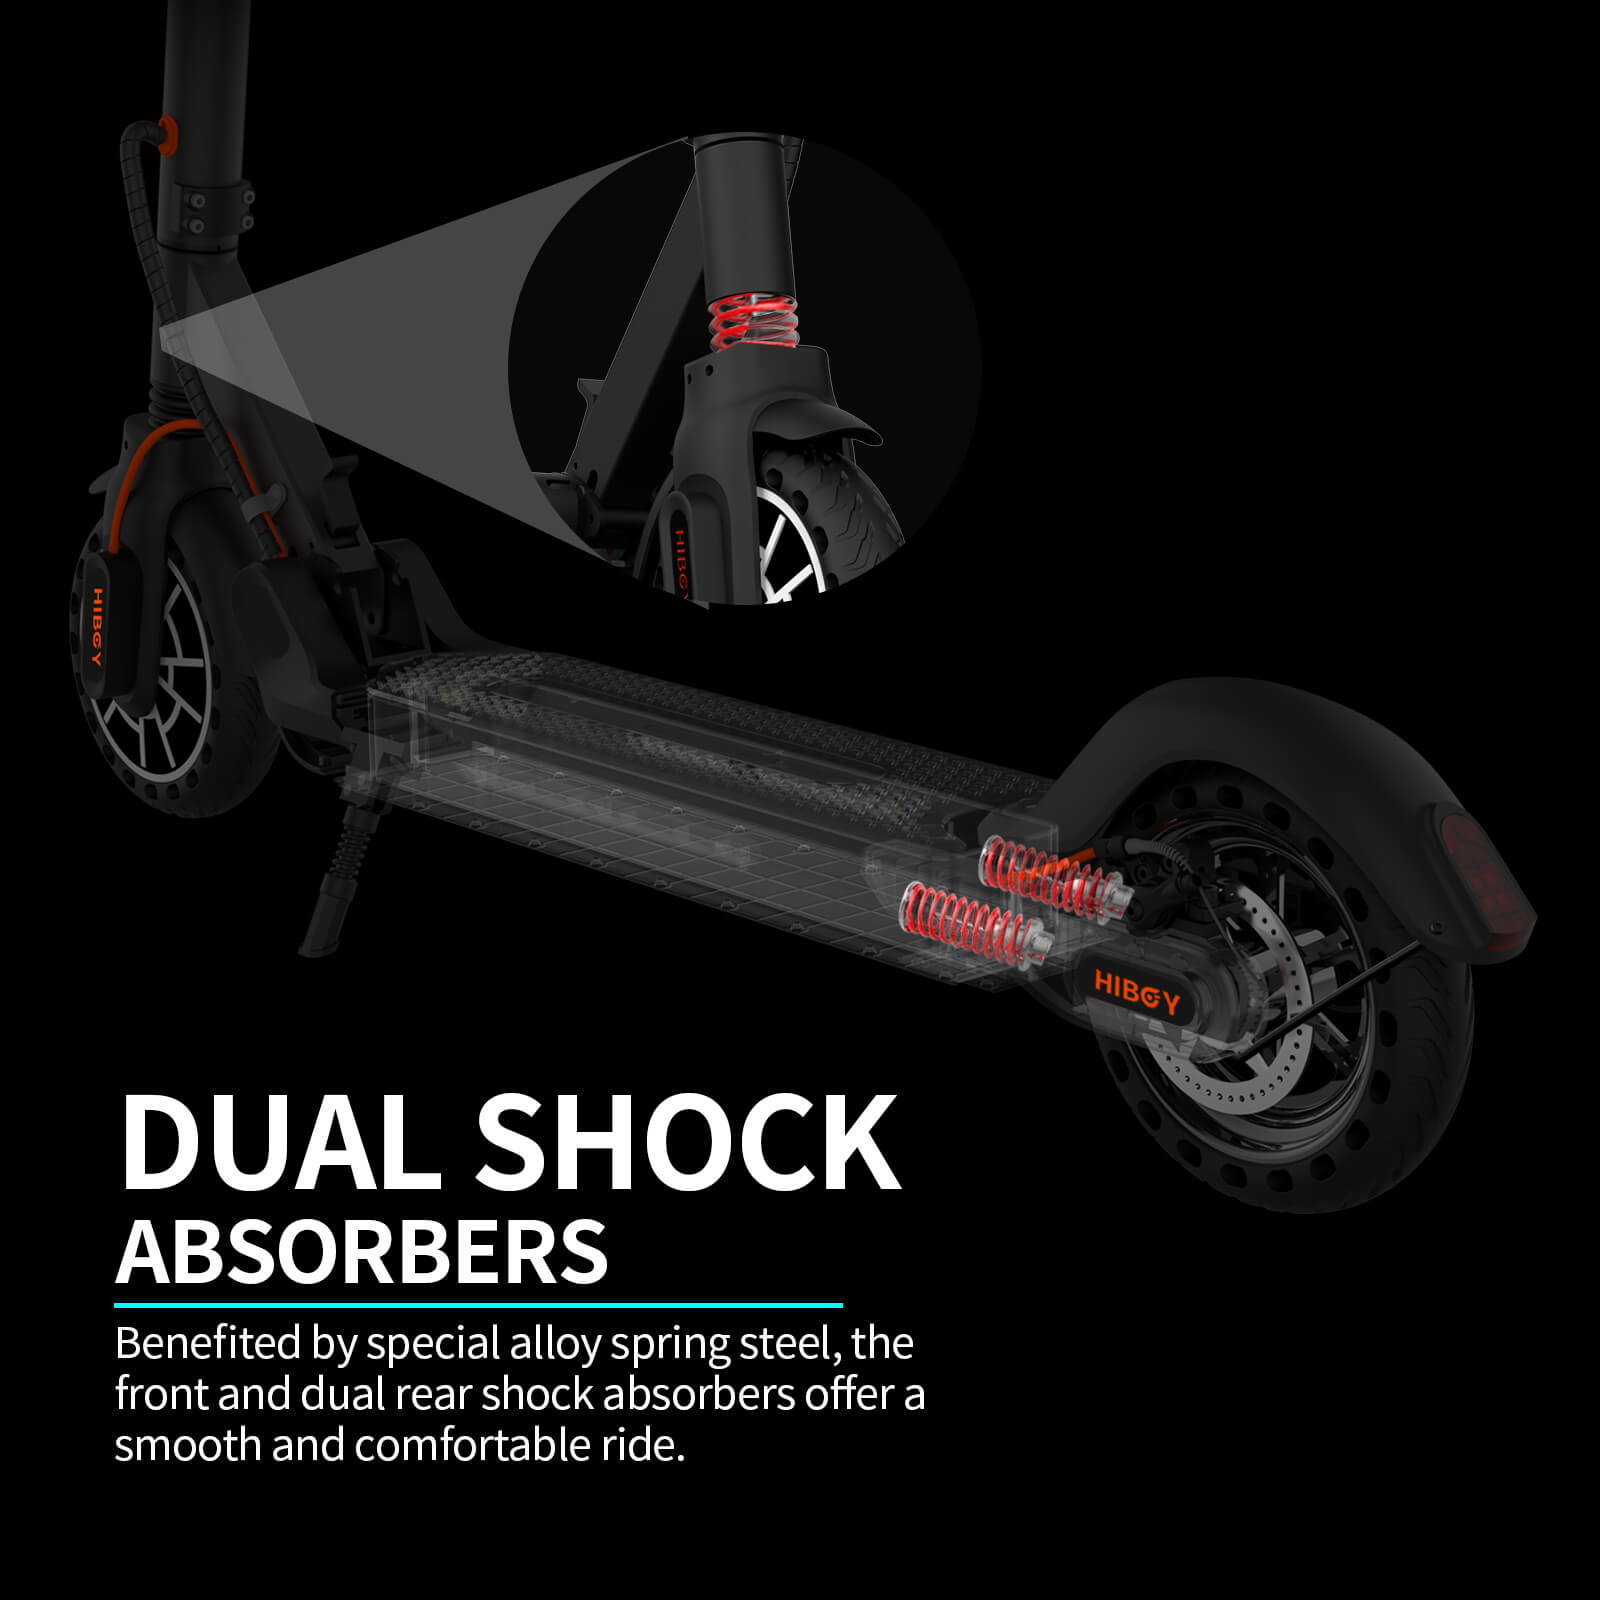 HIBOY MAX V2 Electric Scooter Dual Shock Absorbers